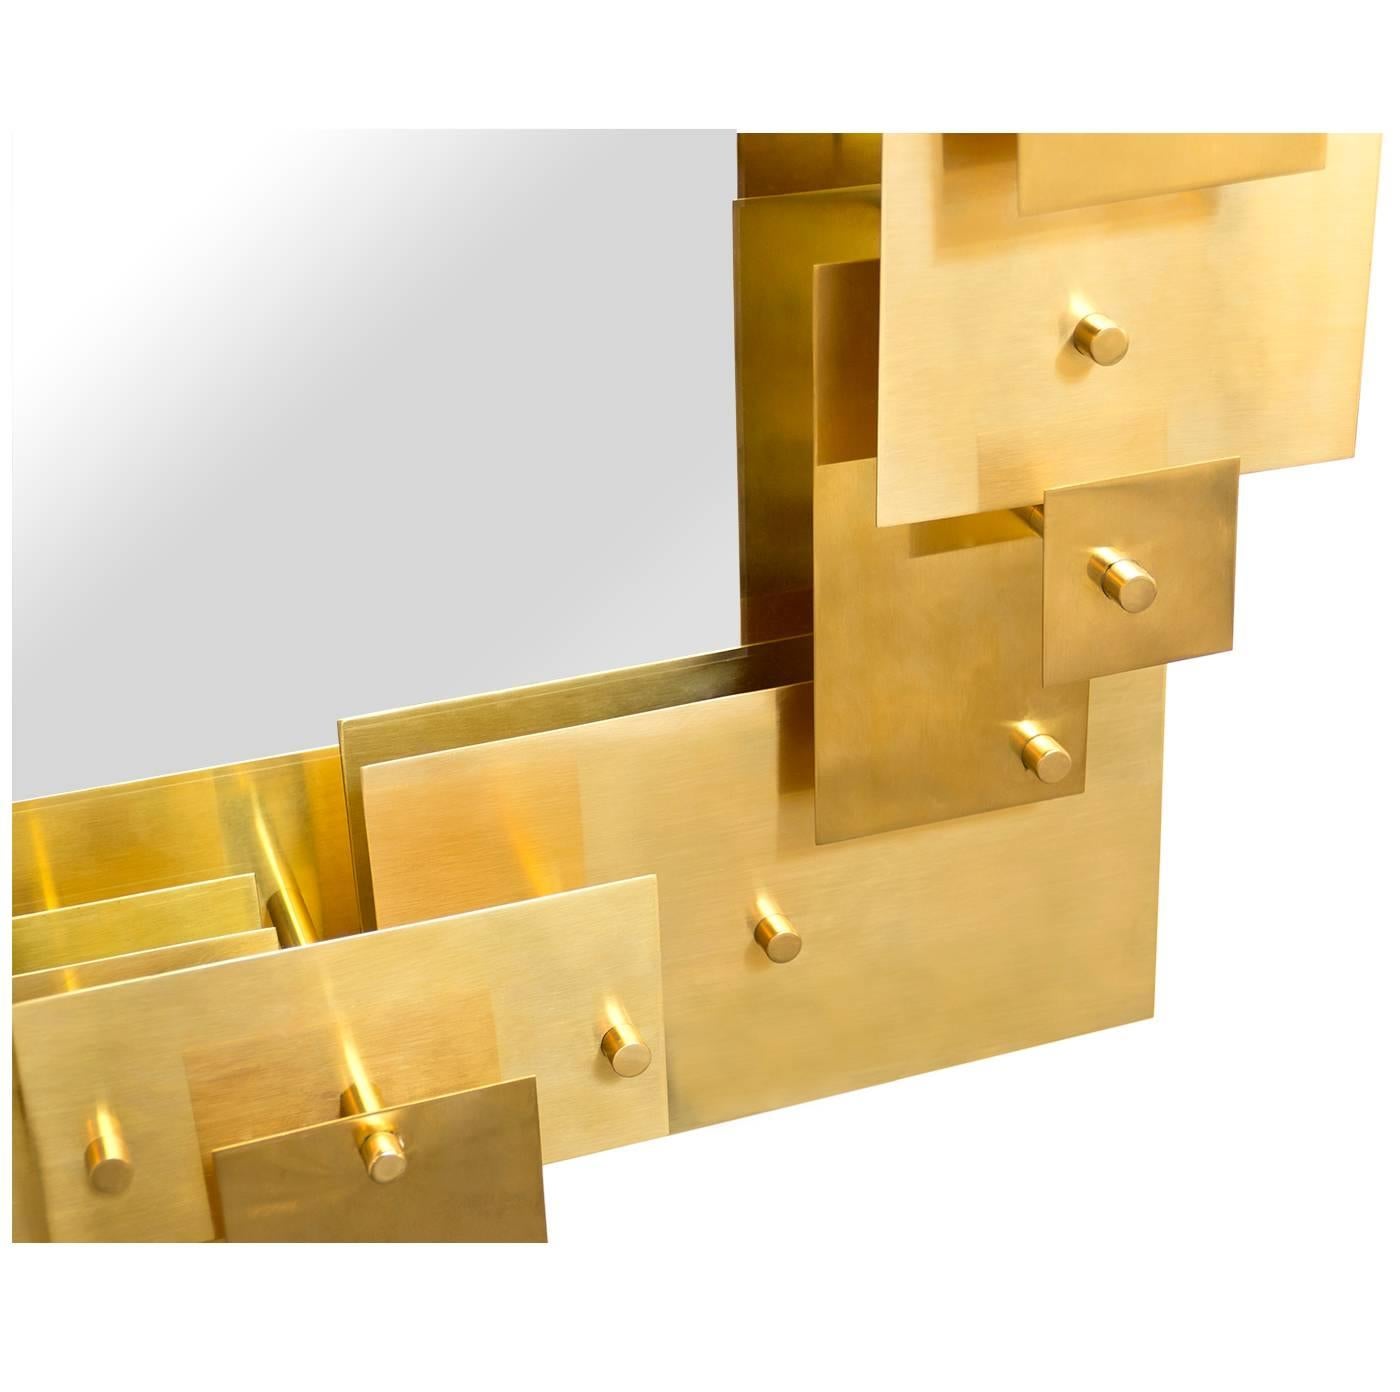 Architectural Modernism. Inspired by a house of cards, our Puzzle Mirror is made of sheets of solid brass layered in a dynamic composition. Add intrigue to your foyer, bring moody glamour to your powder room, or bestow major majesty on your mantle.